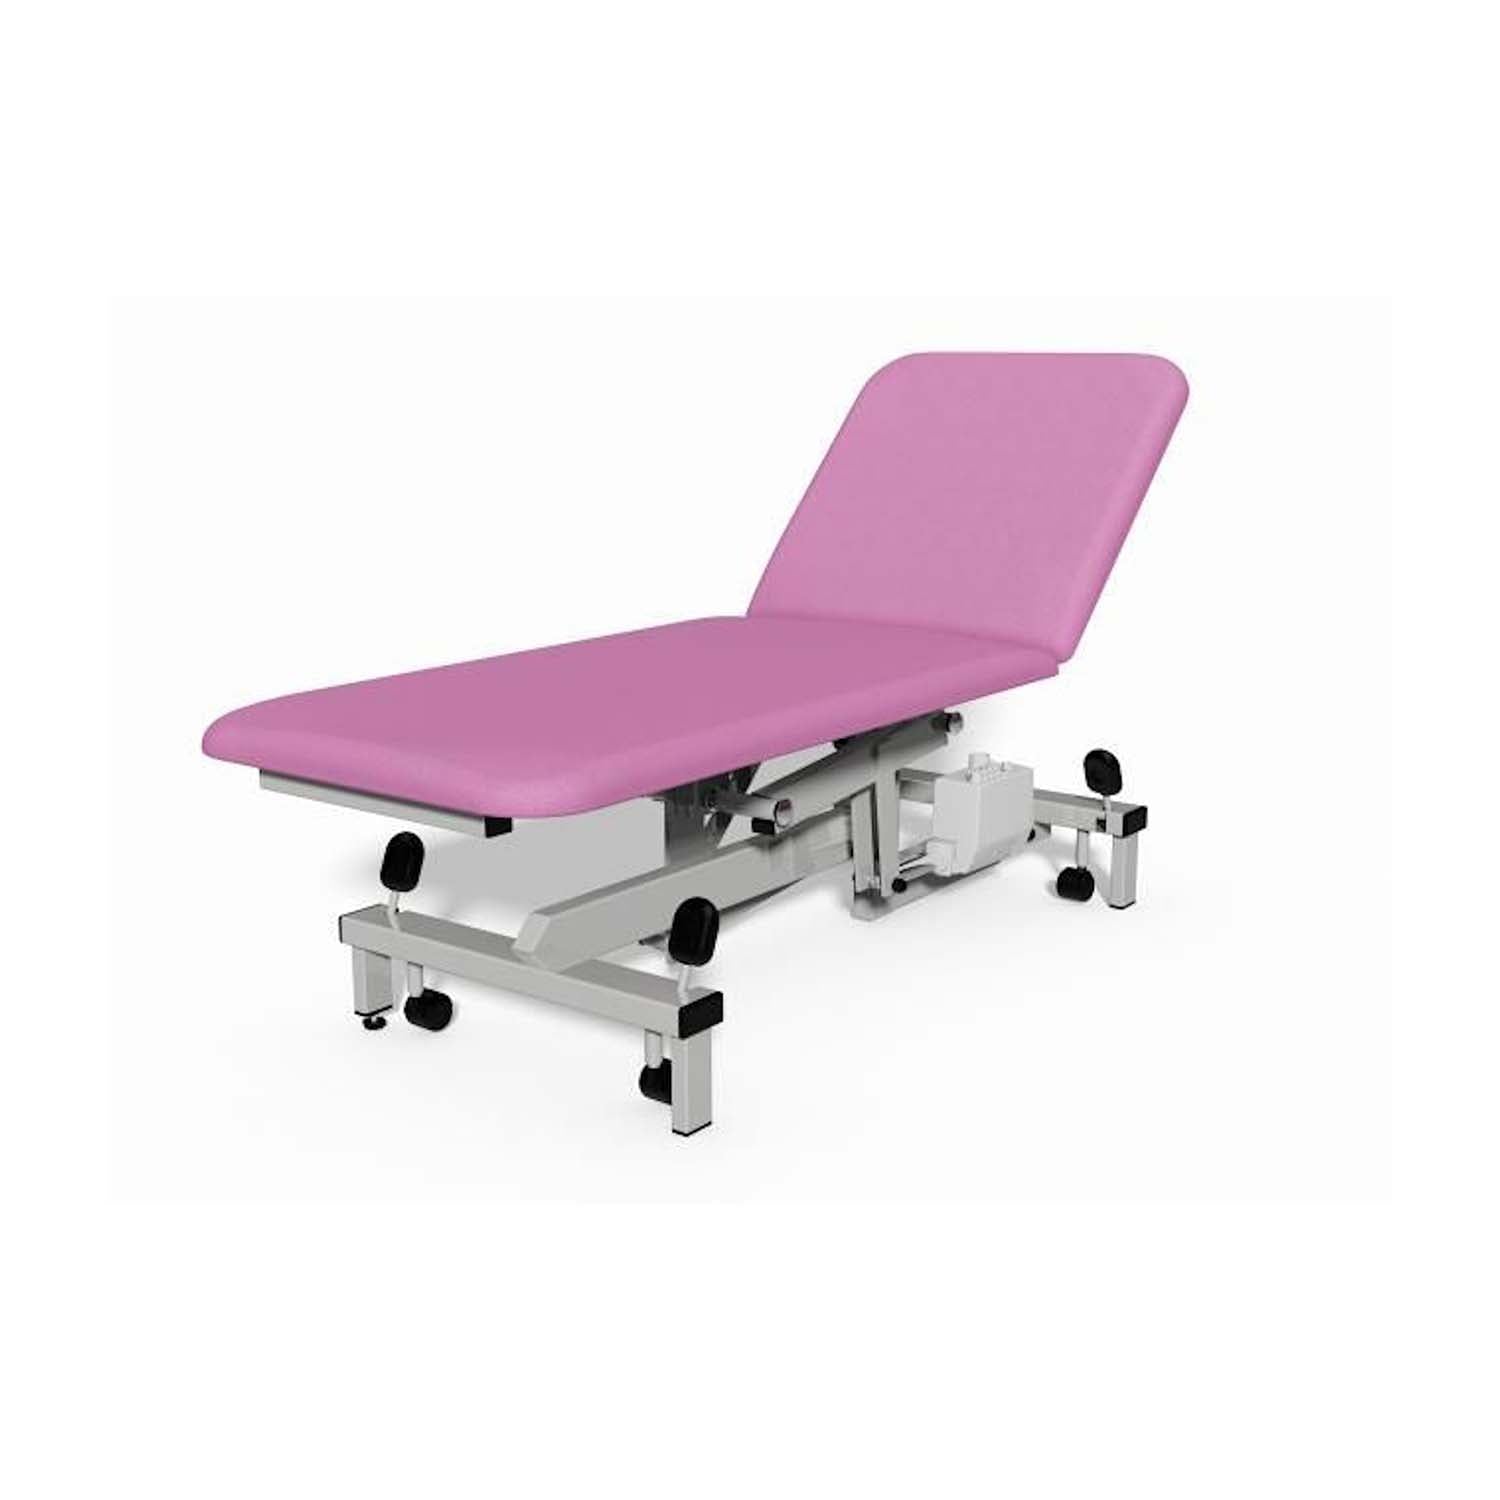 Plinth 2000 Model 502 Examination Couch | Electric | Candy